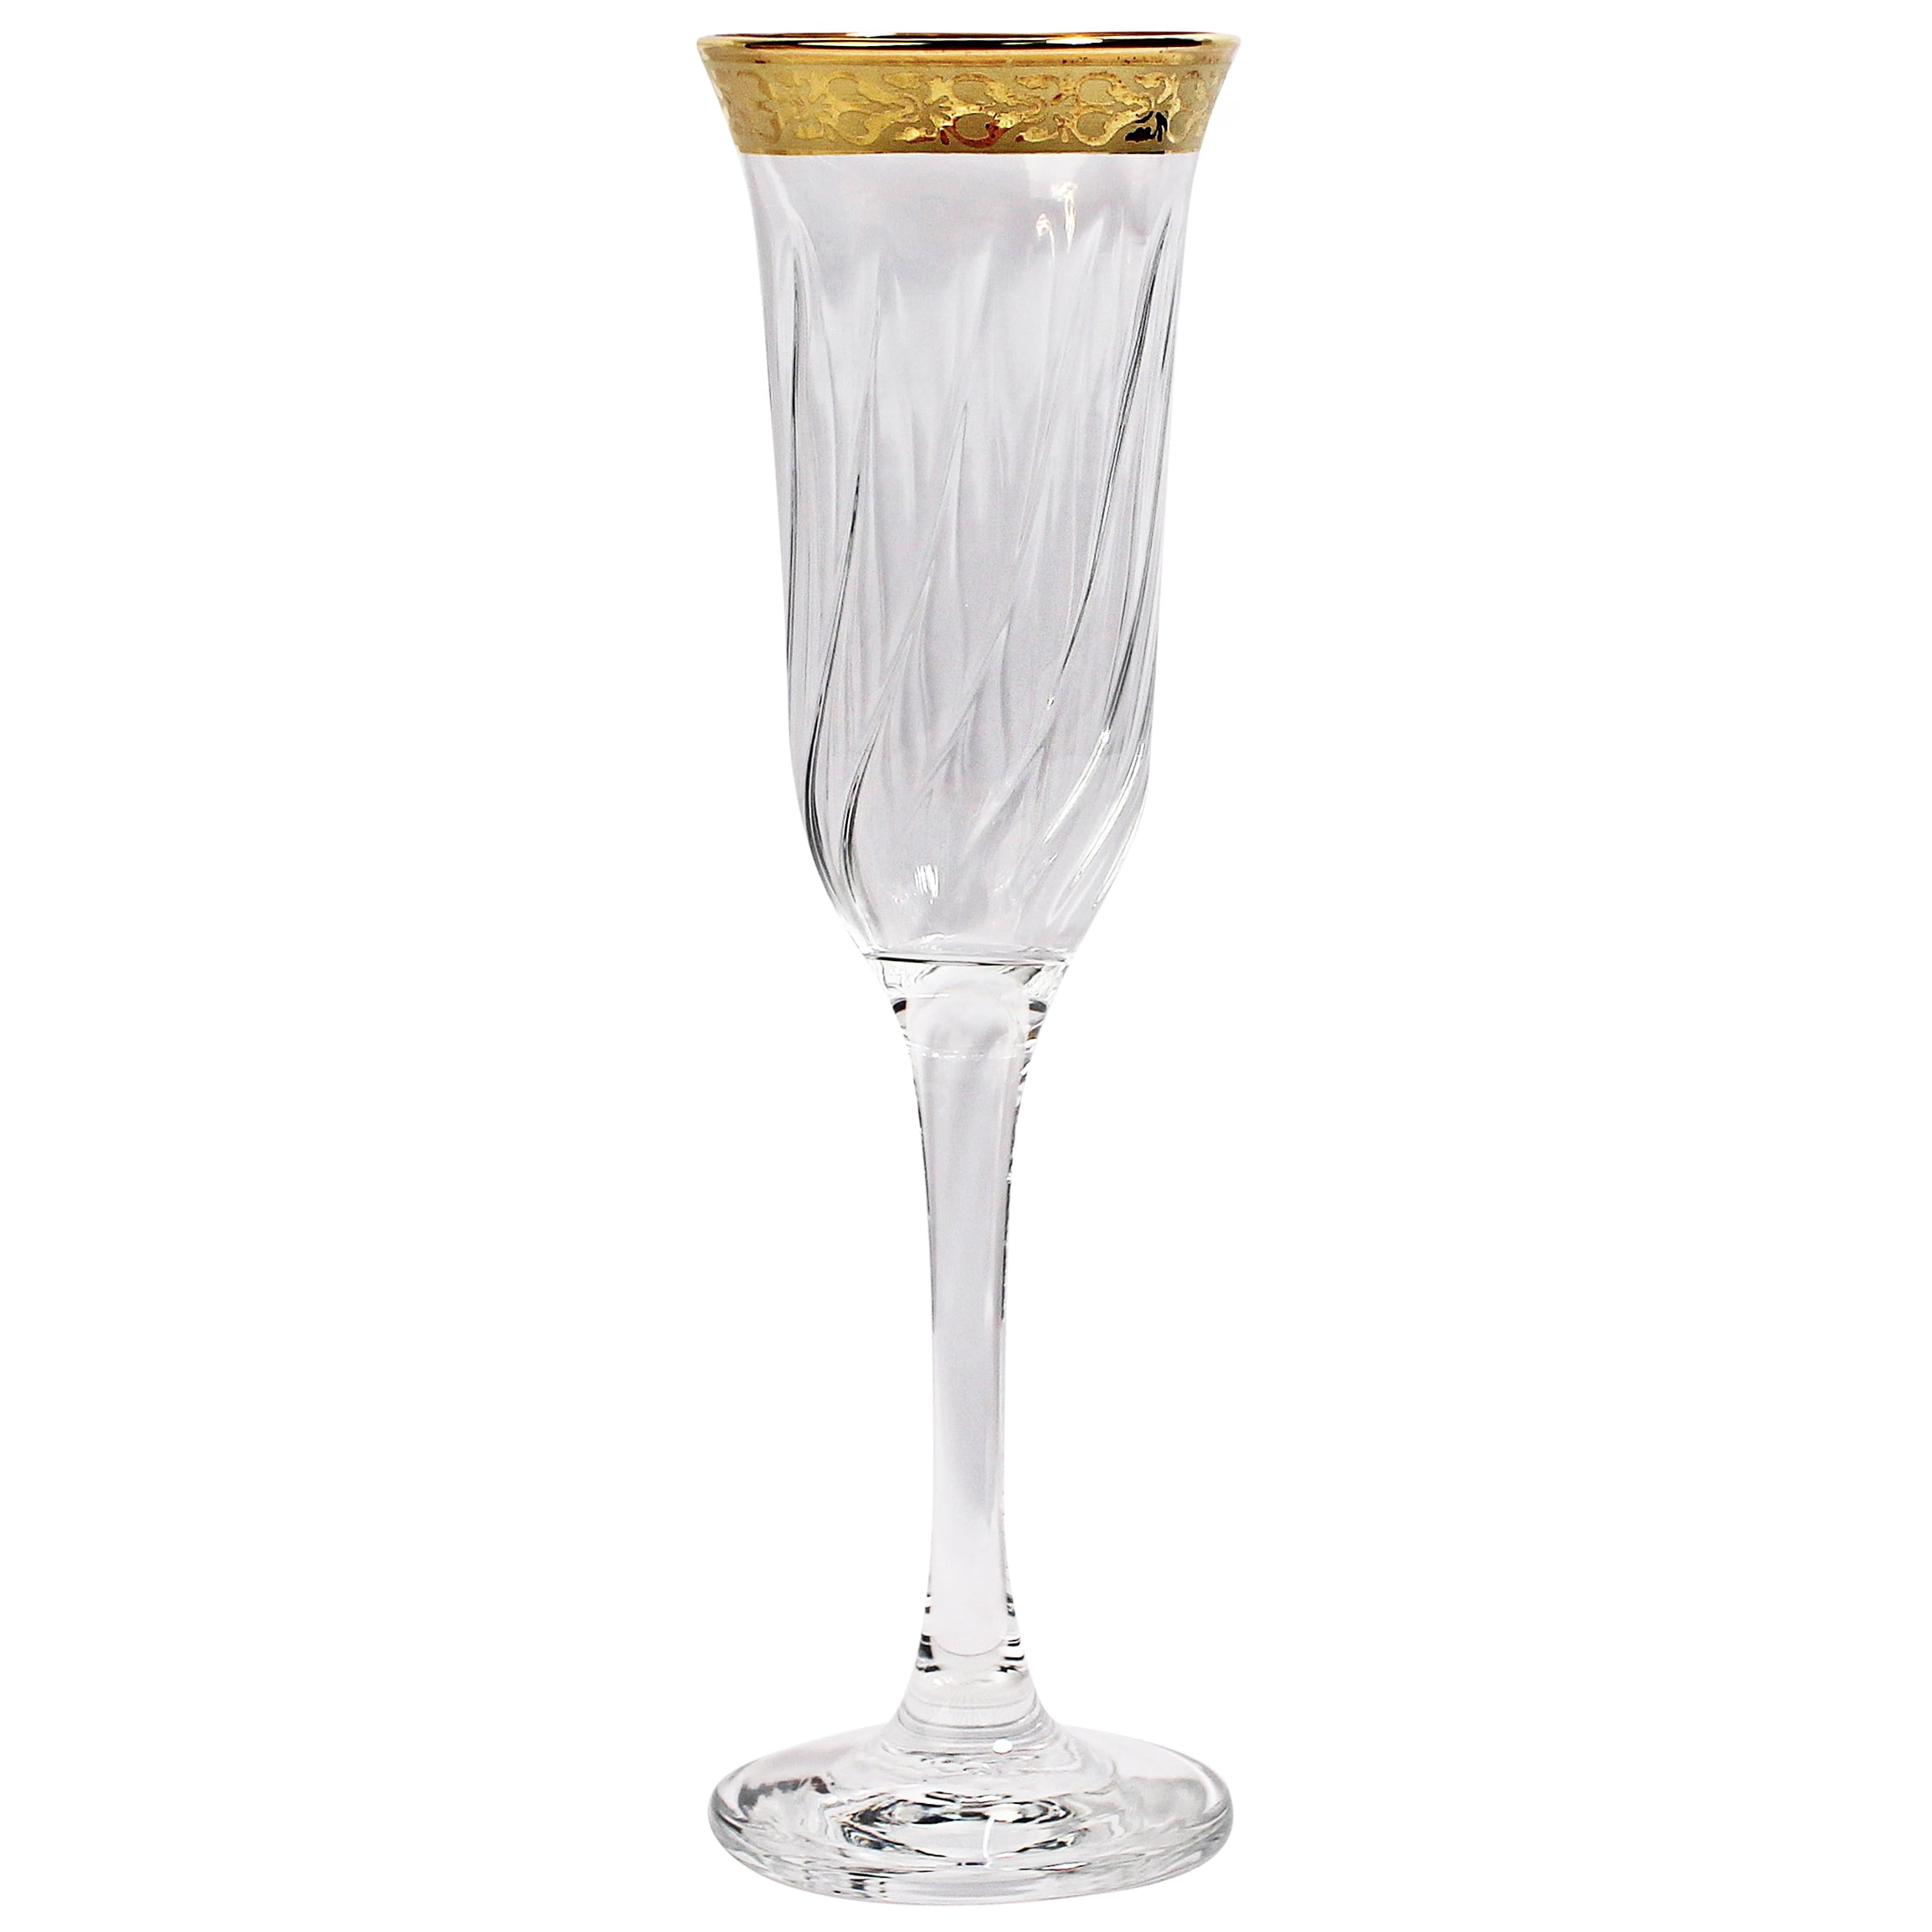 Cadamada Wine Glasses,8oz White Wine Goblets,for Red or White Wine,  High-end Banquets, Parties, Bars, Weddings, Gifts (16 pcs)